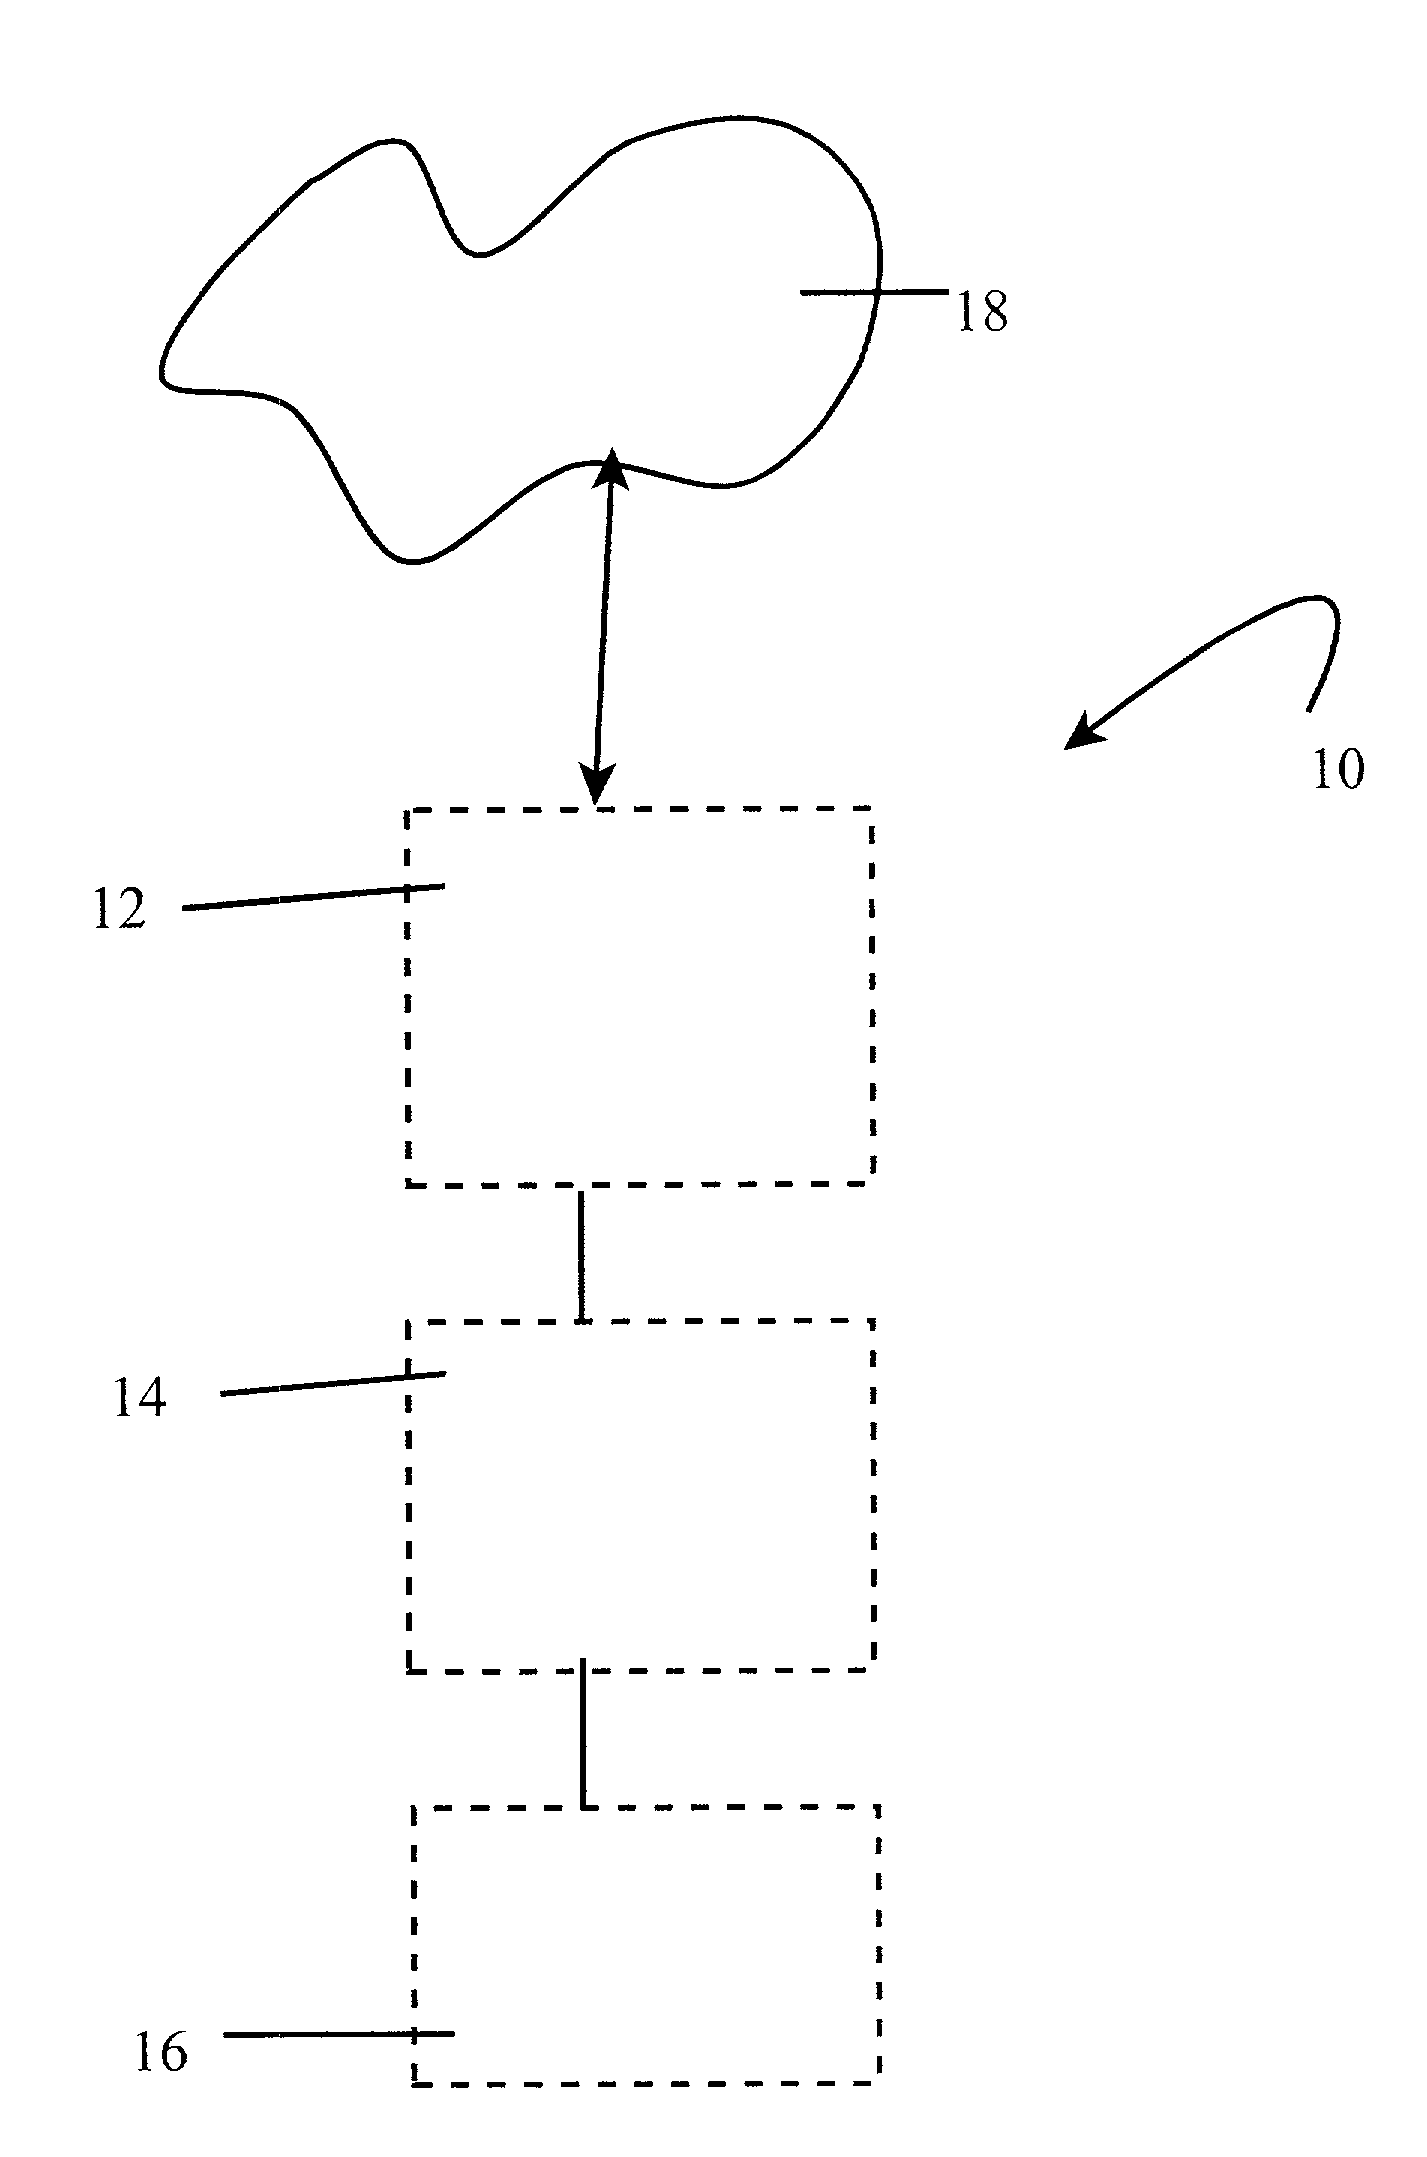 Automated loan processing system and method